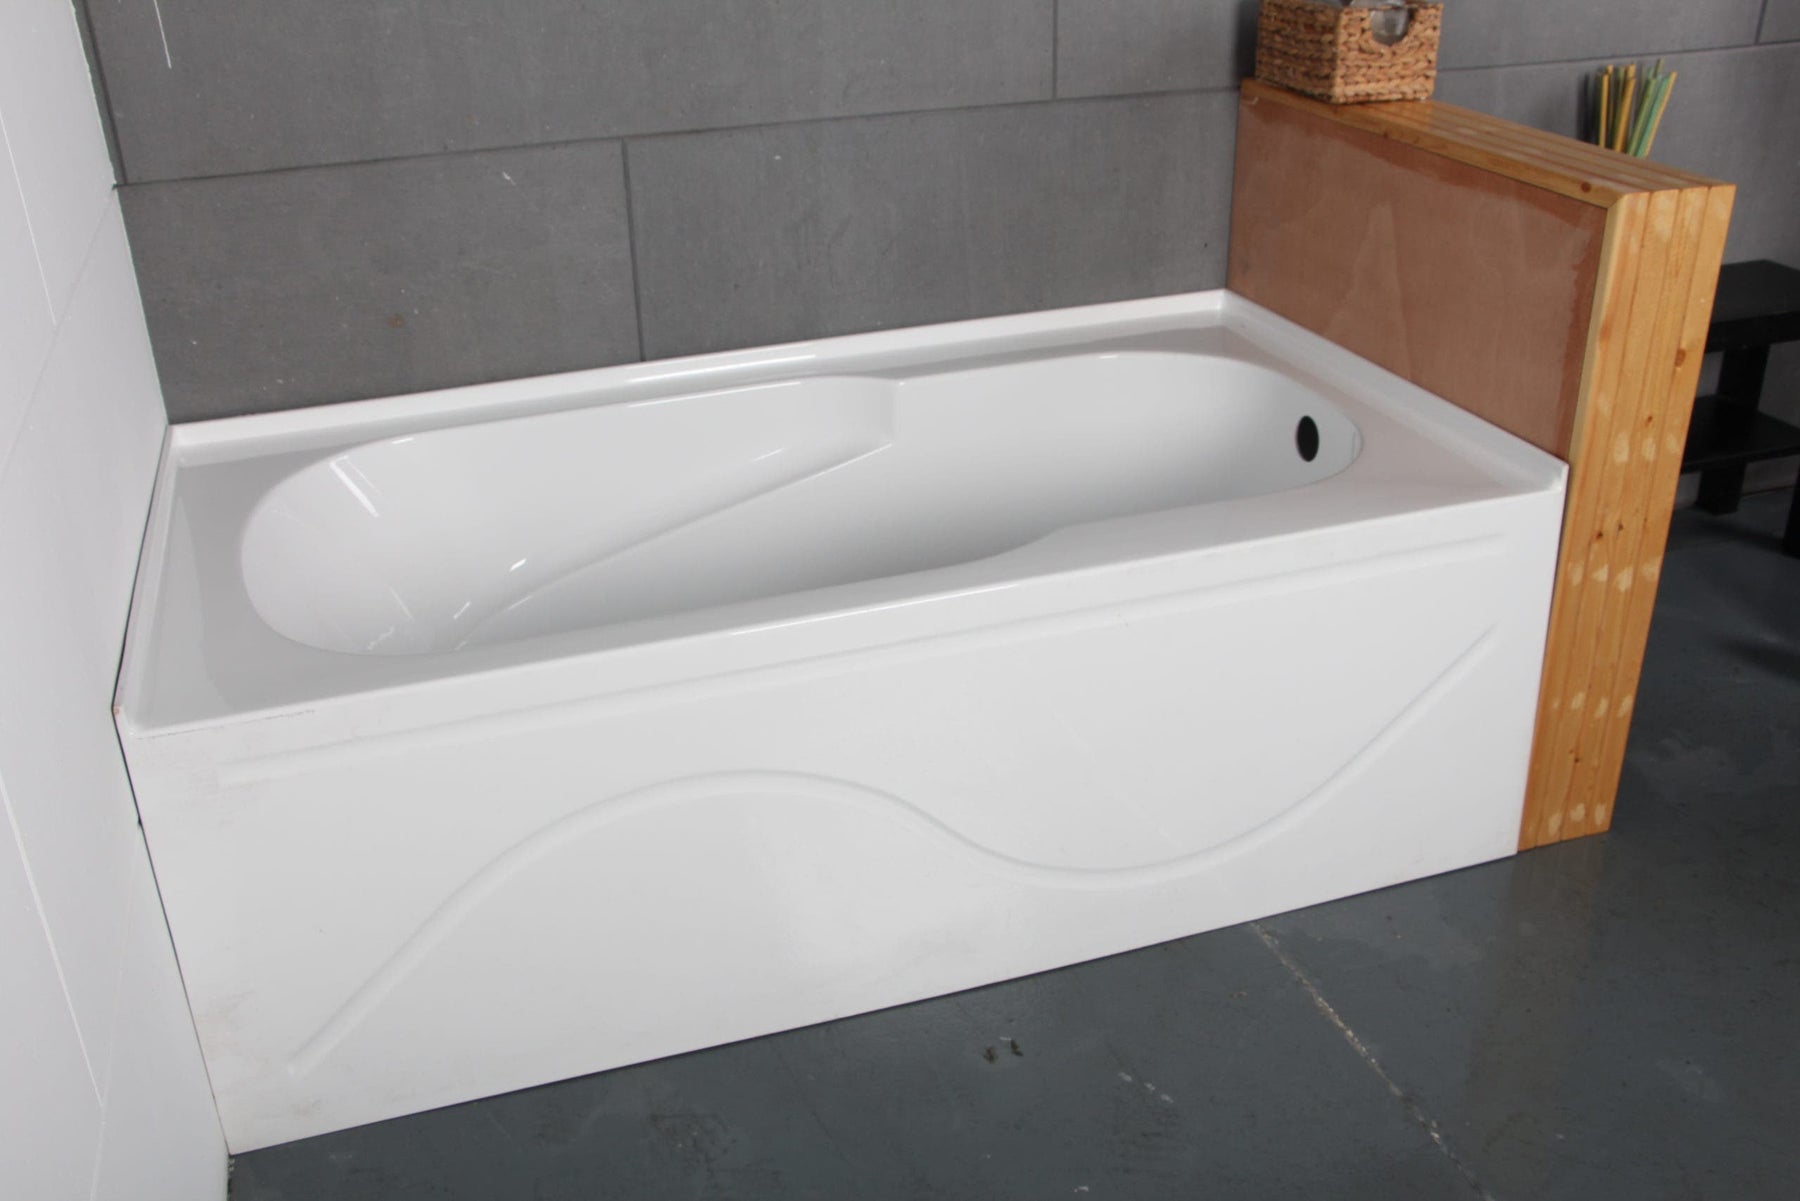 Sink Into the Aqua Eden Acrylic Alcove Tub and Forget About Your Stress, VTAP603216R